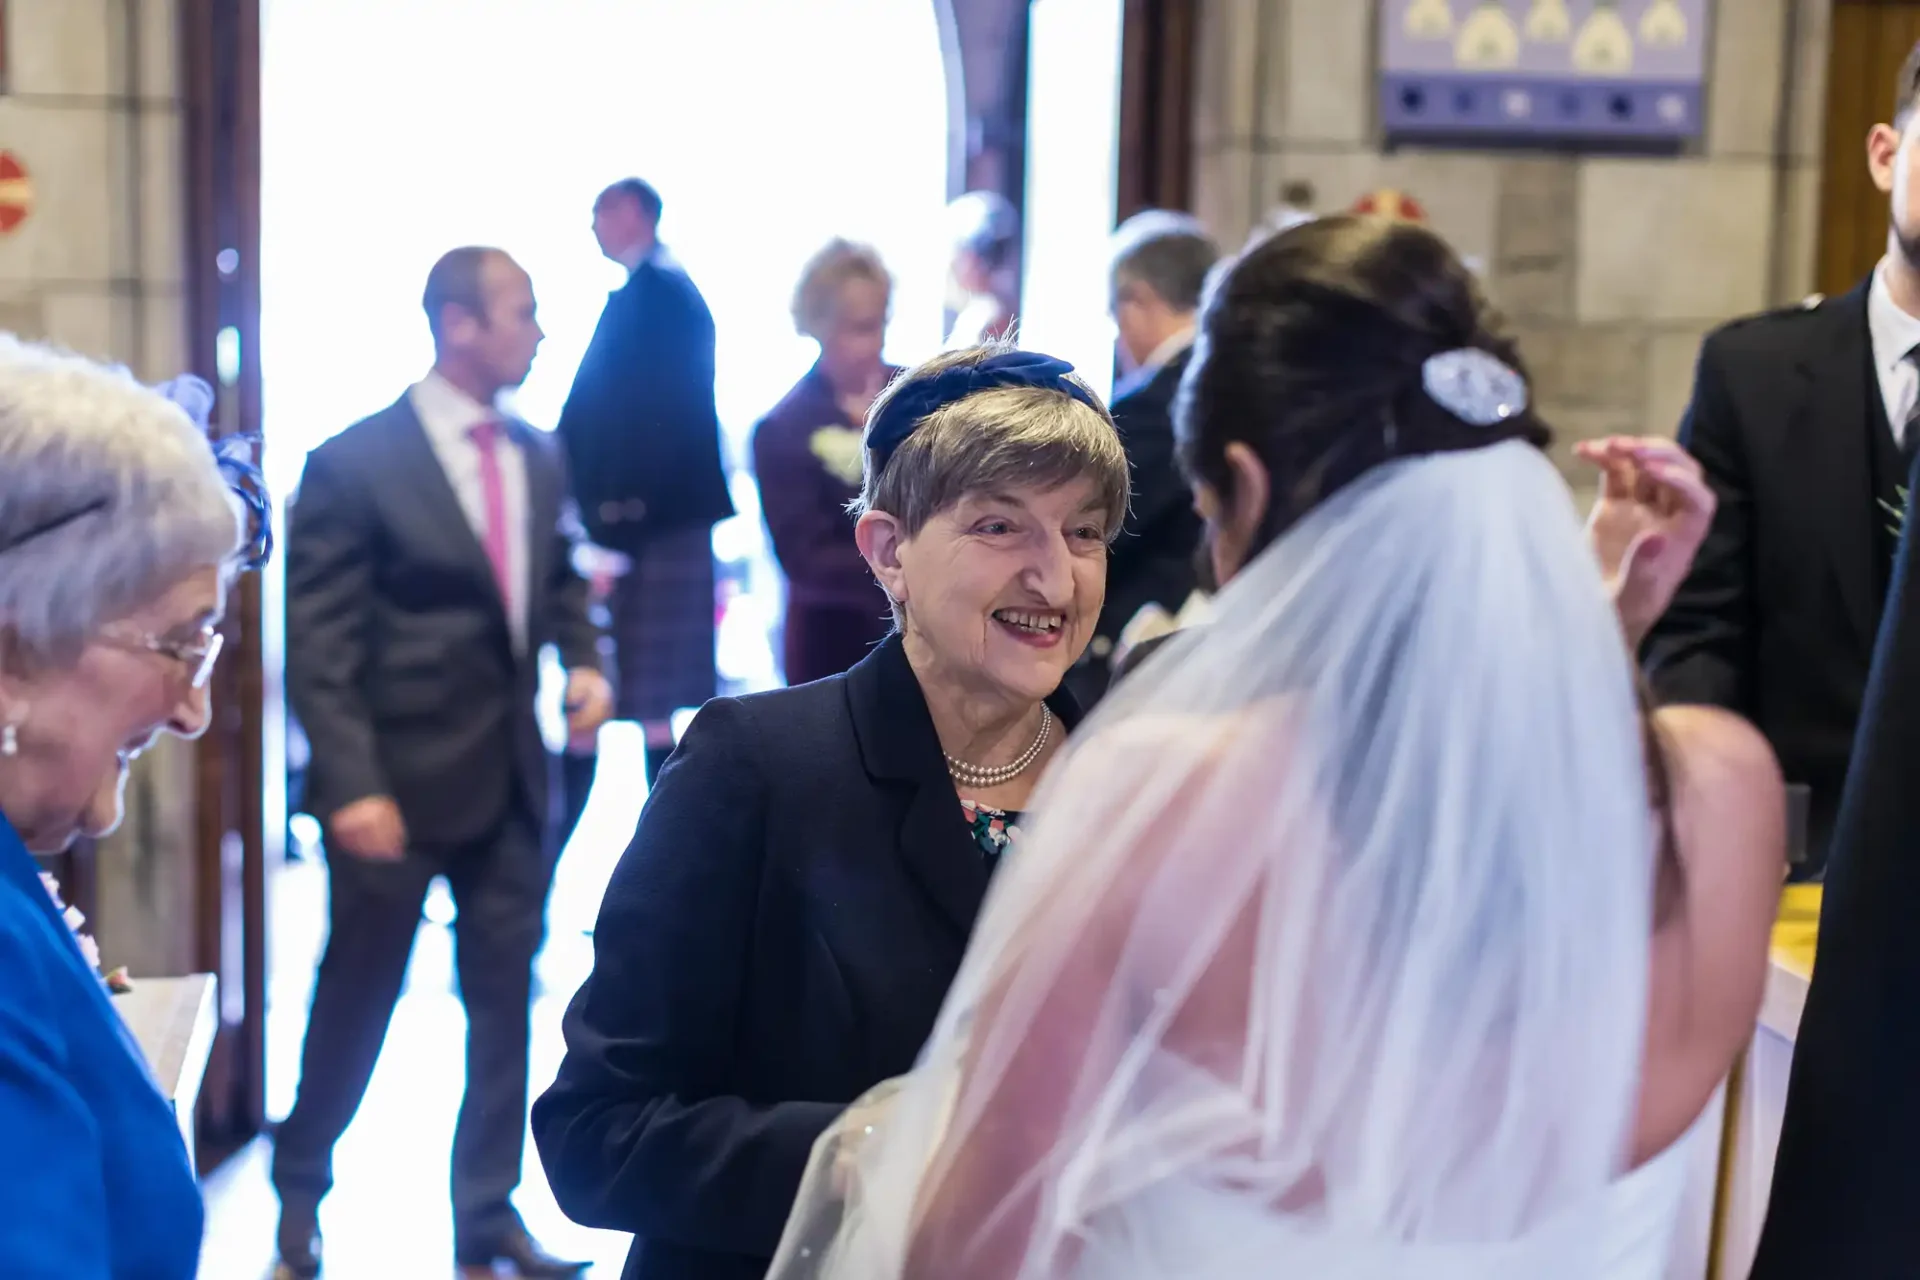 An elderly woman smiling joyfully at a bride in a veil inside a sunlit church, with other guests blurred in the background.